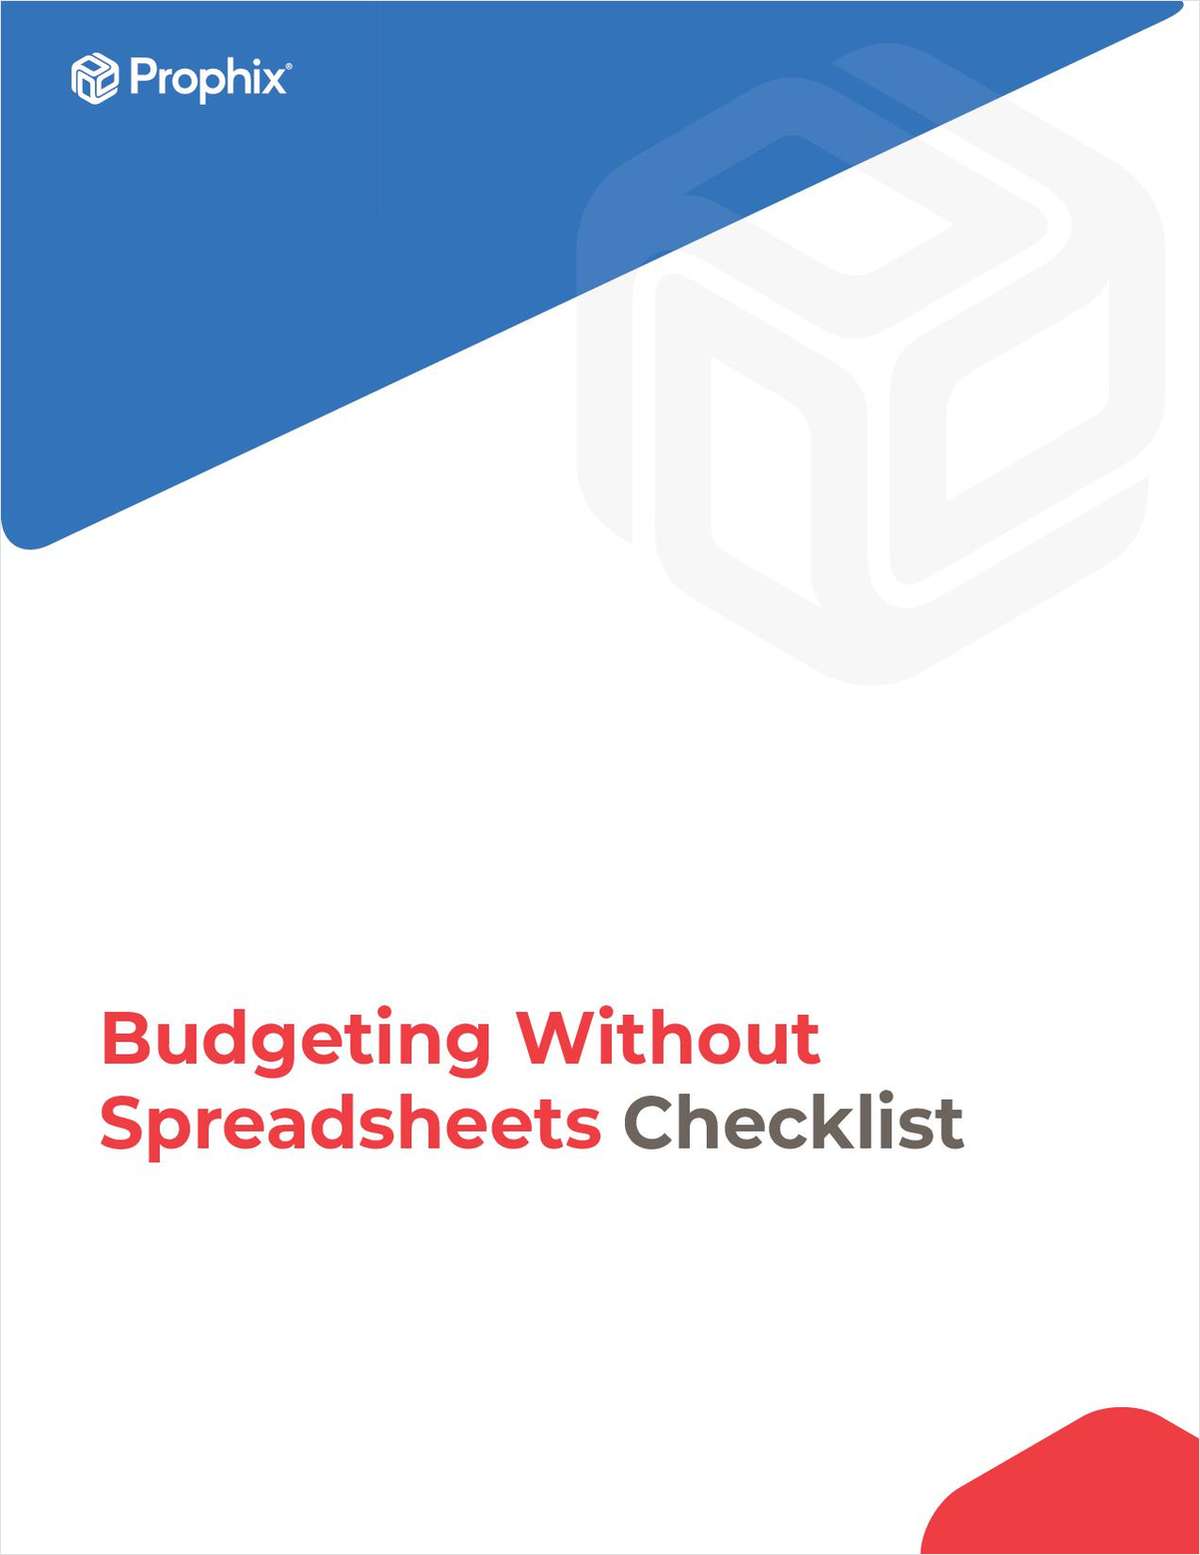 Budgeting Without Spreadsheets Checklist